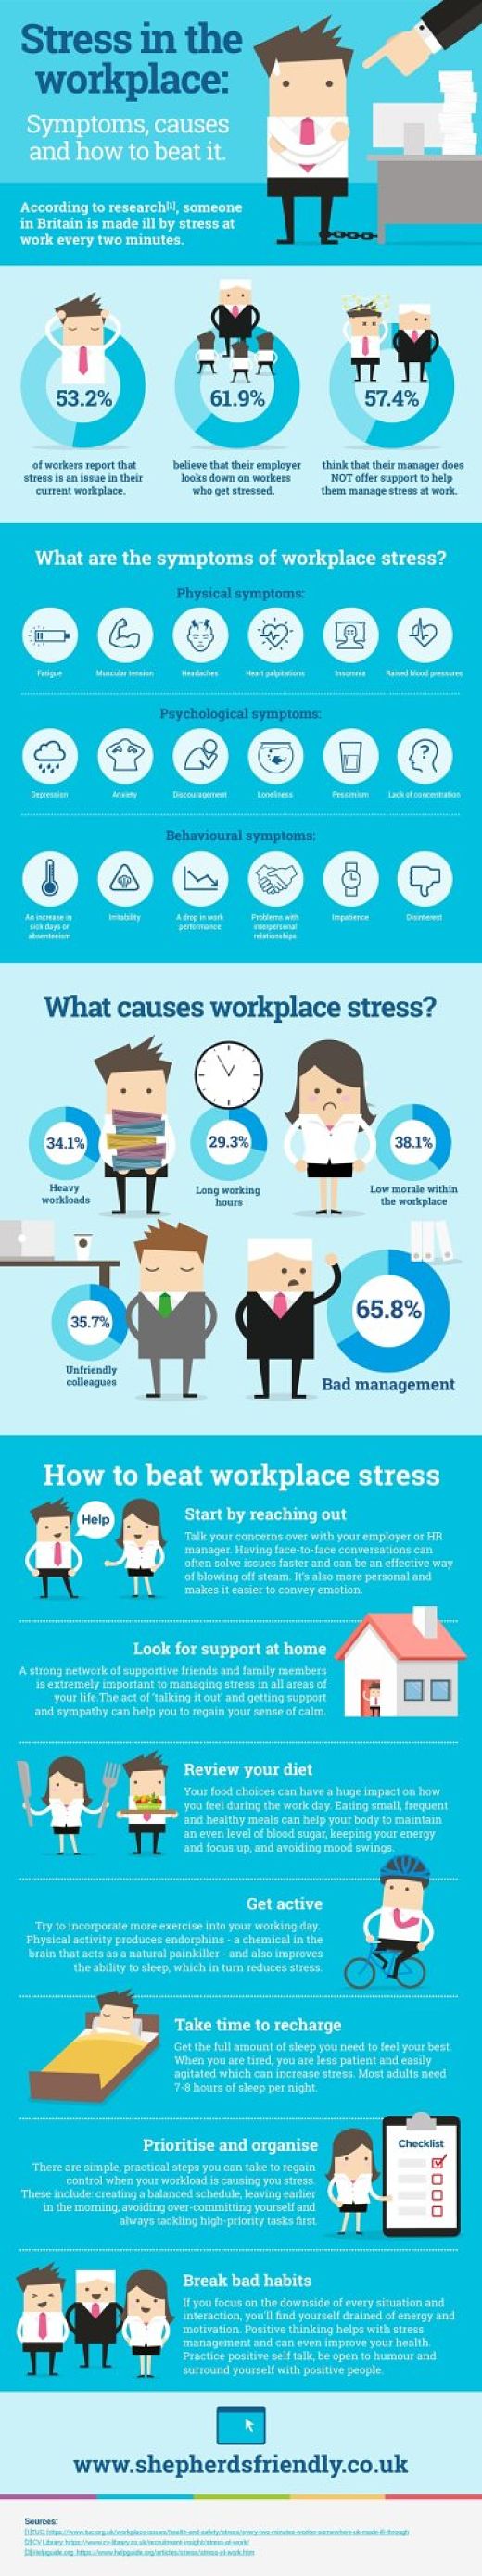 Stress at work: Symptoms, causes and how to beat it via Shepherds Friendly Society